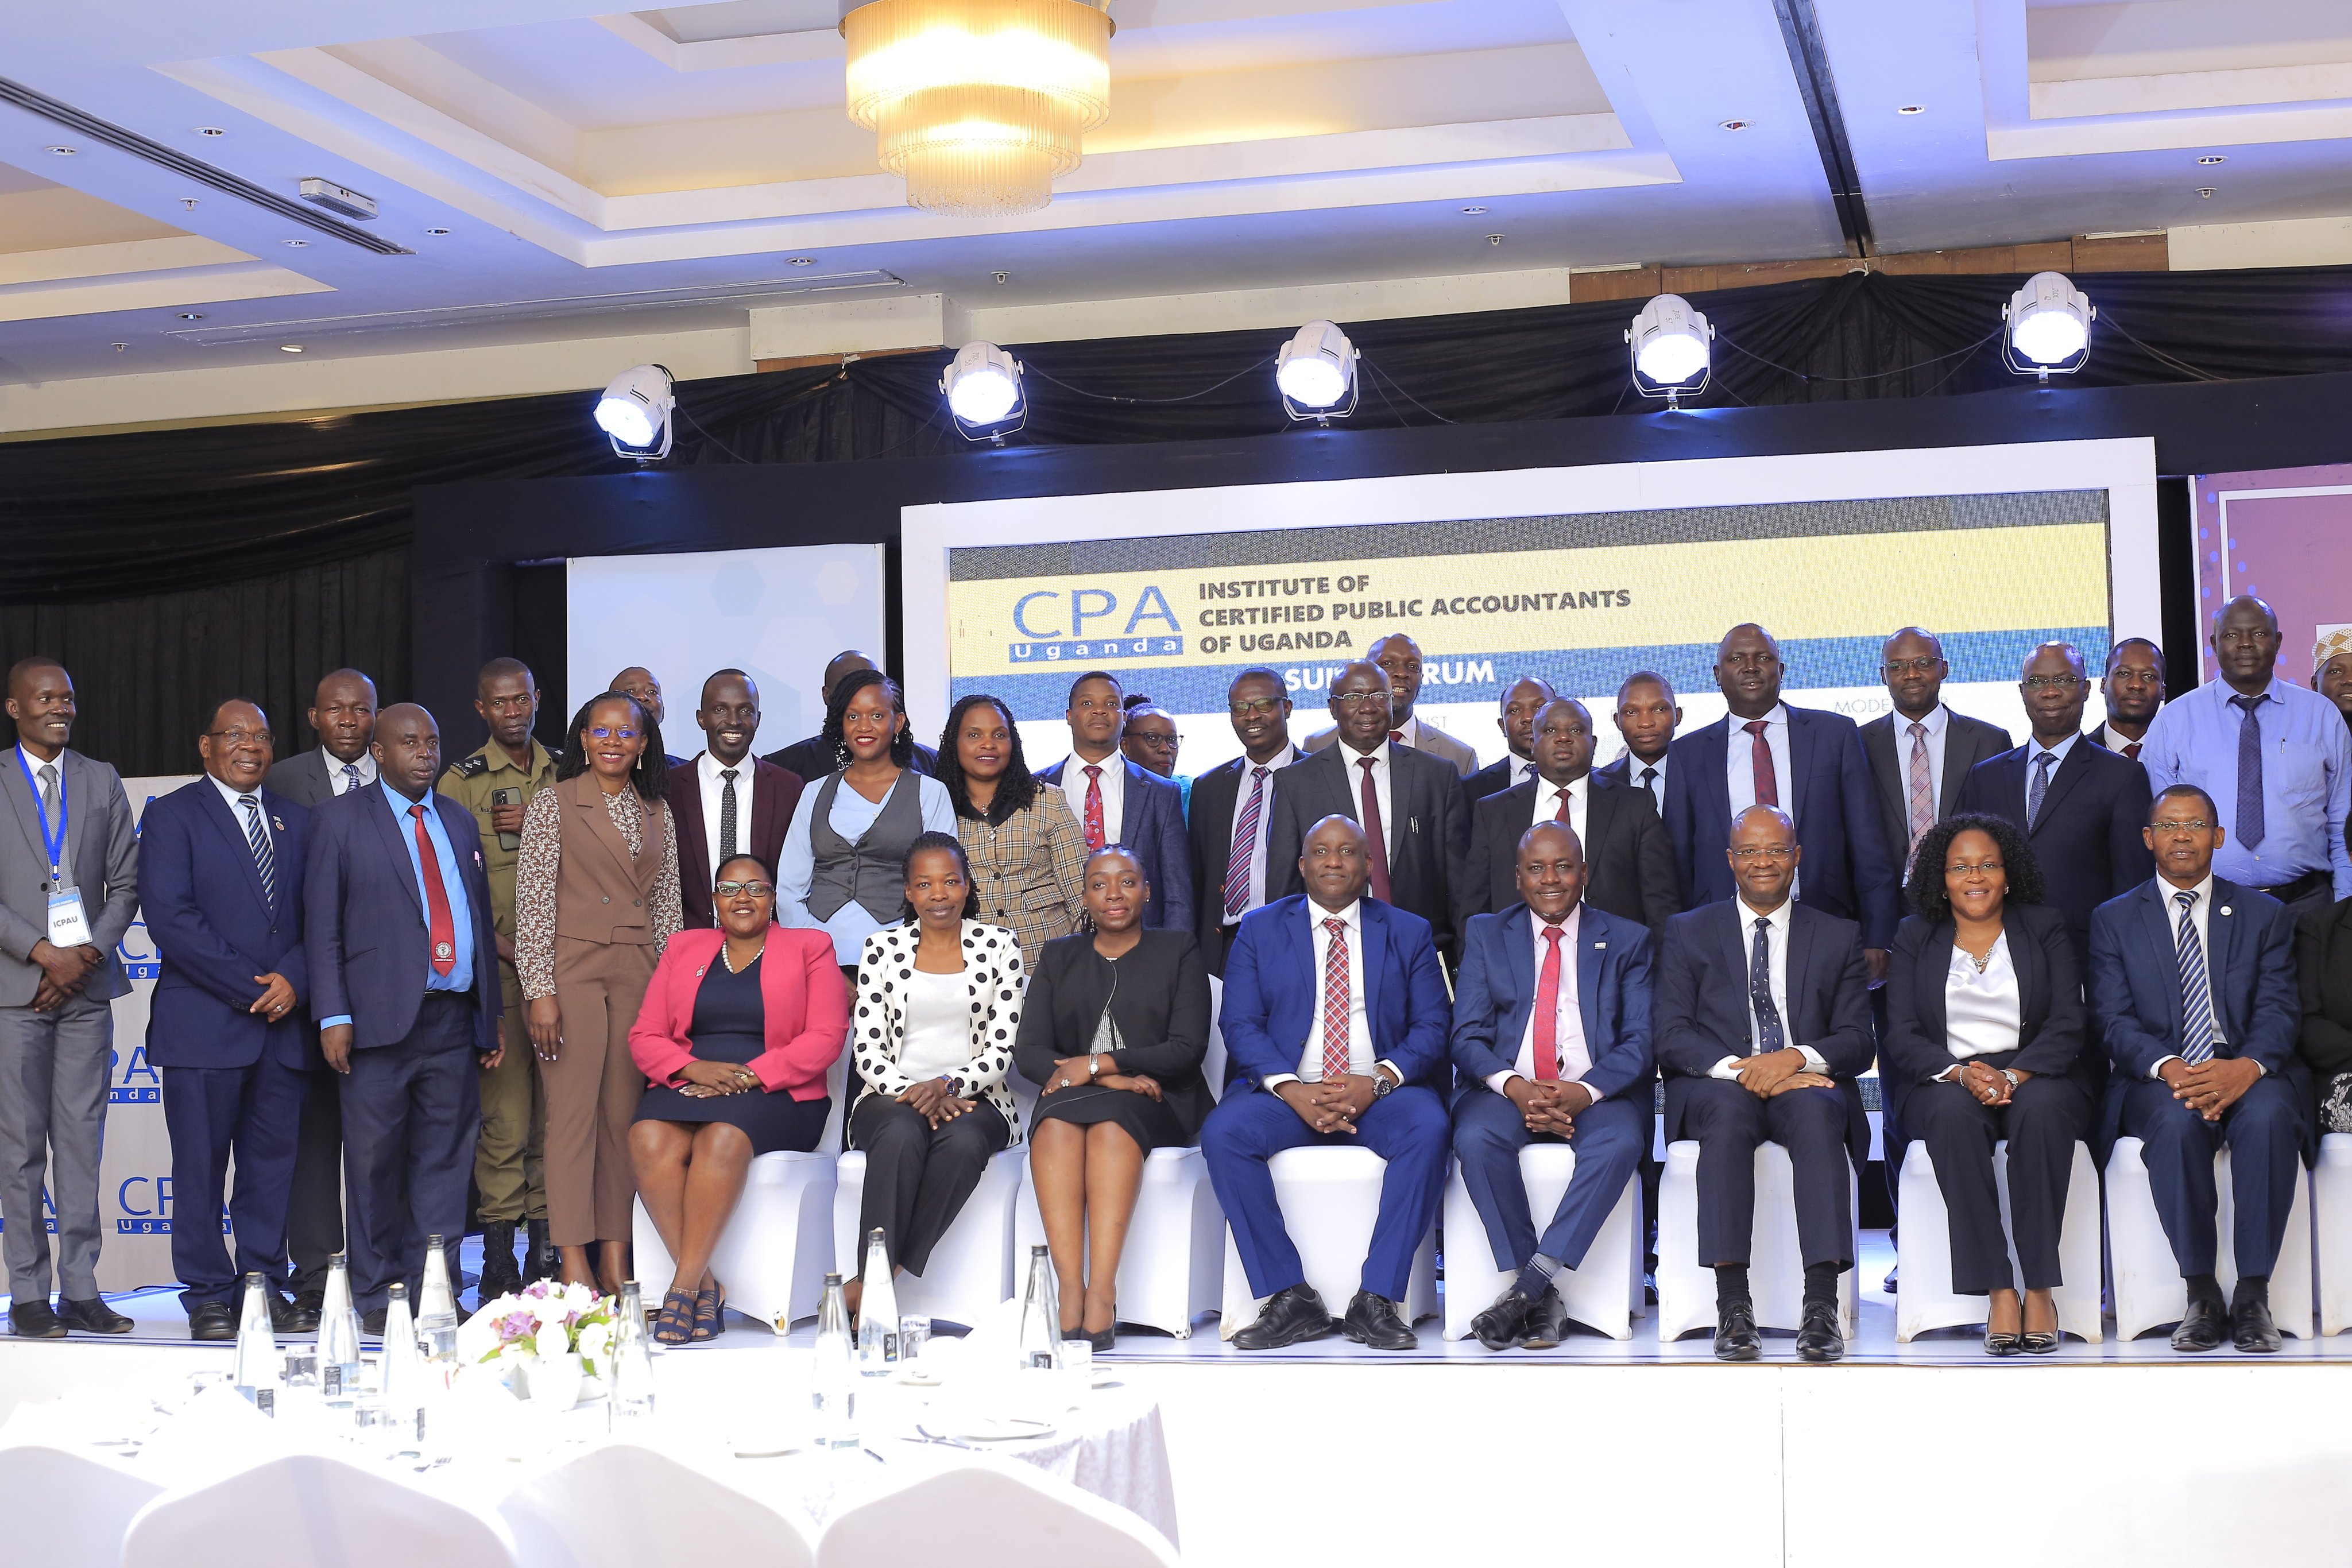 Some of the Chairs and Members of Boards, CEOs, and CFOs and other attendees at the 2nd C-Suite Forum at the Kampala Sheraton Hotel